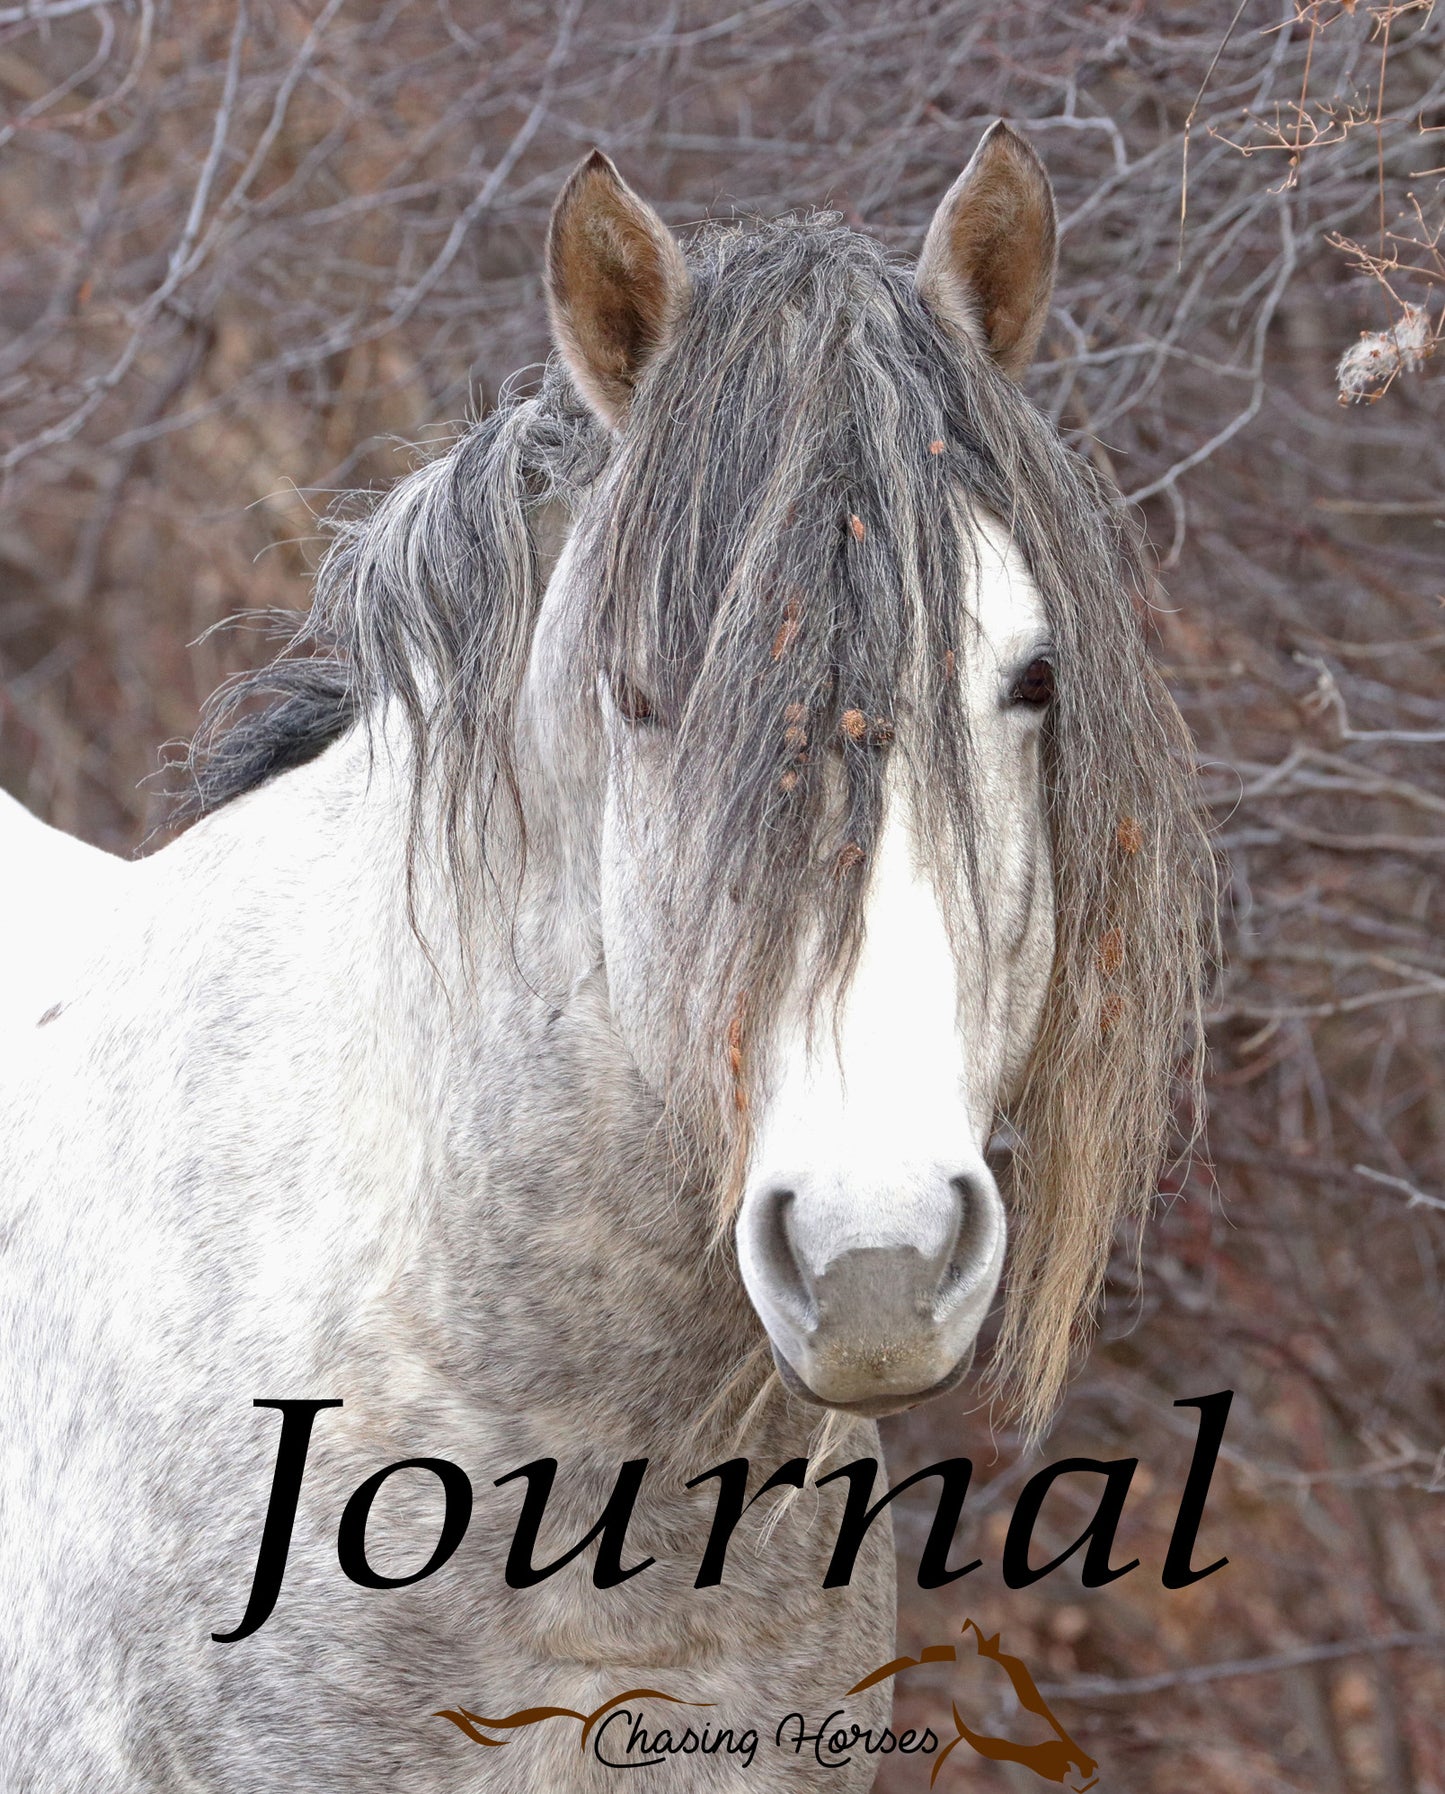 Chasing Horses Journals